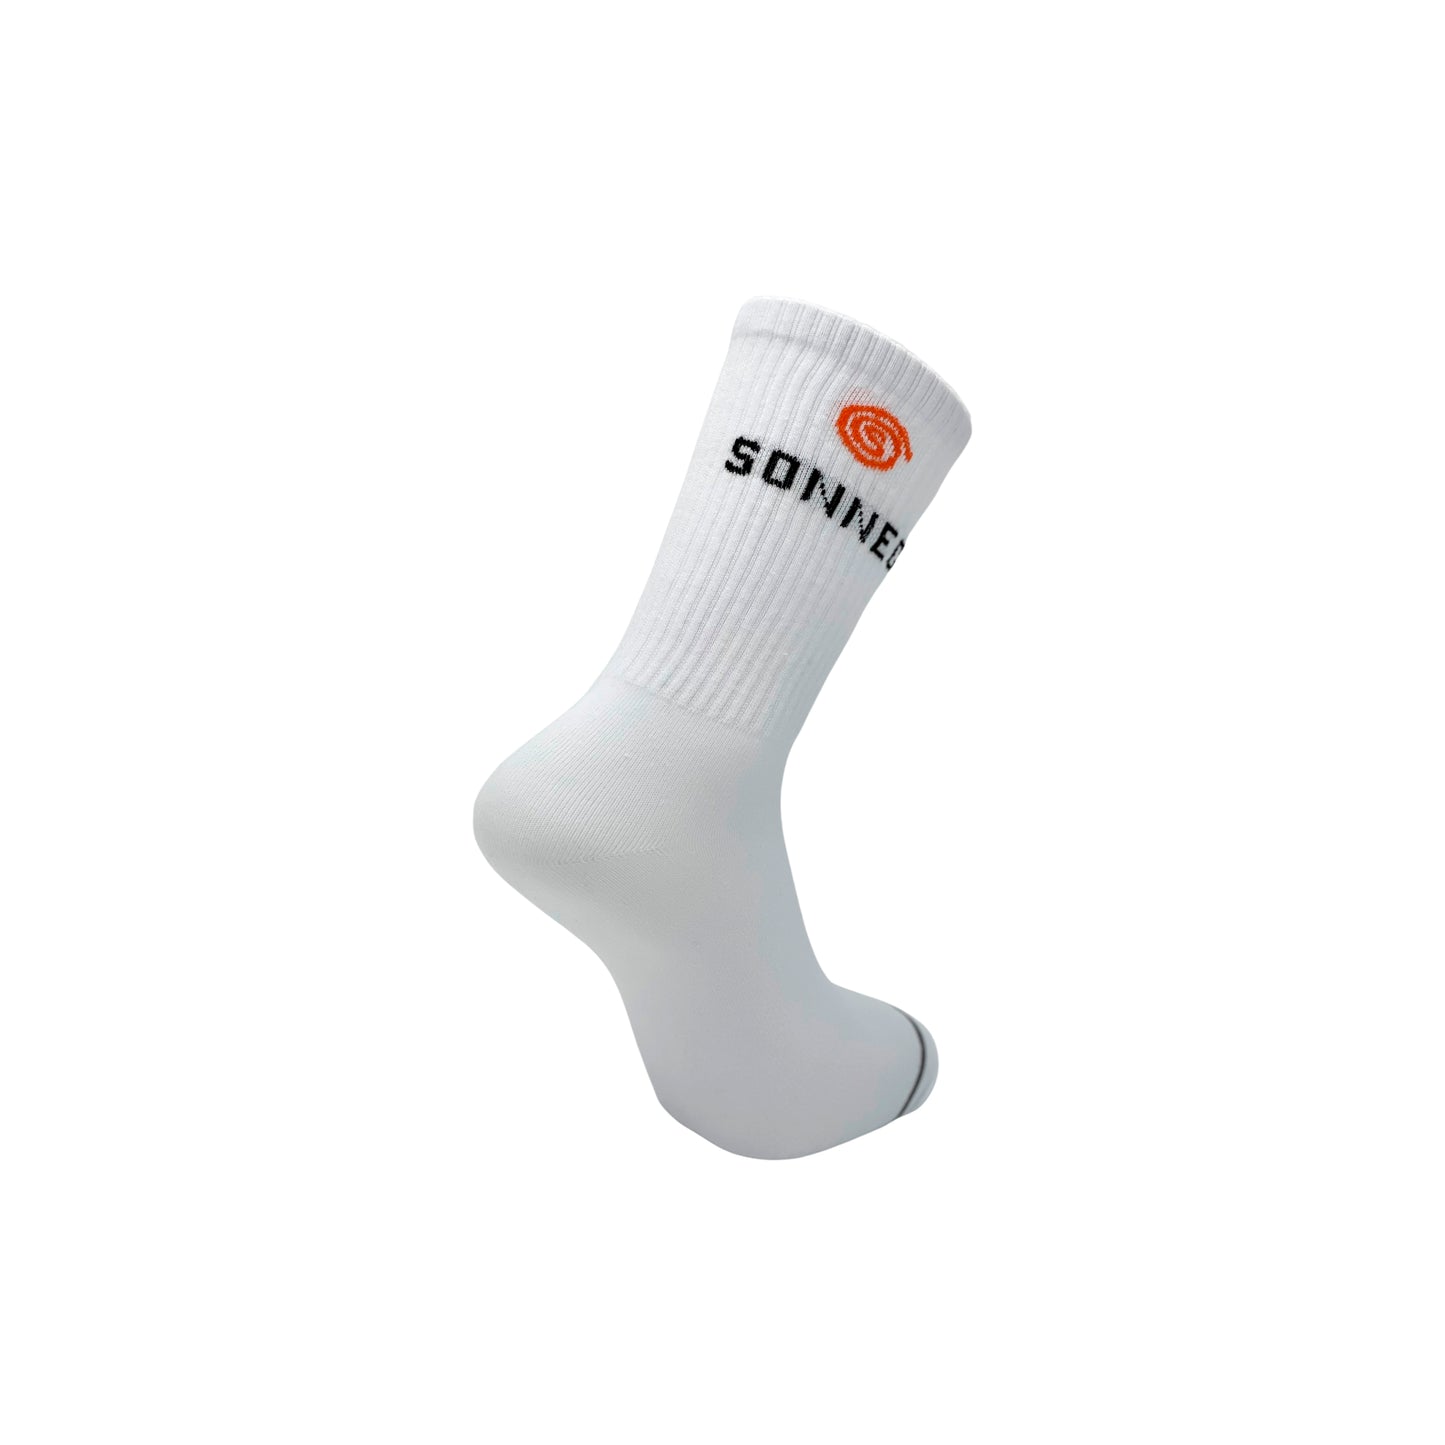 White unisex, fashionable, high, crew, casual and sports socks - 5 and 10 pairs pack